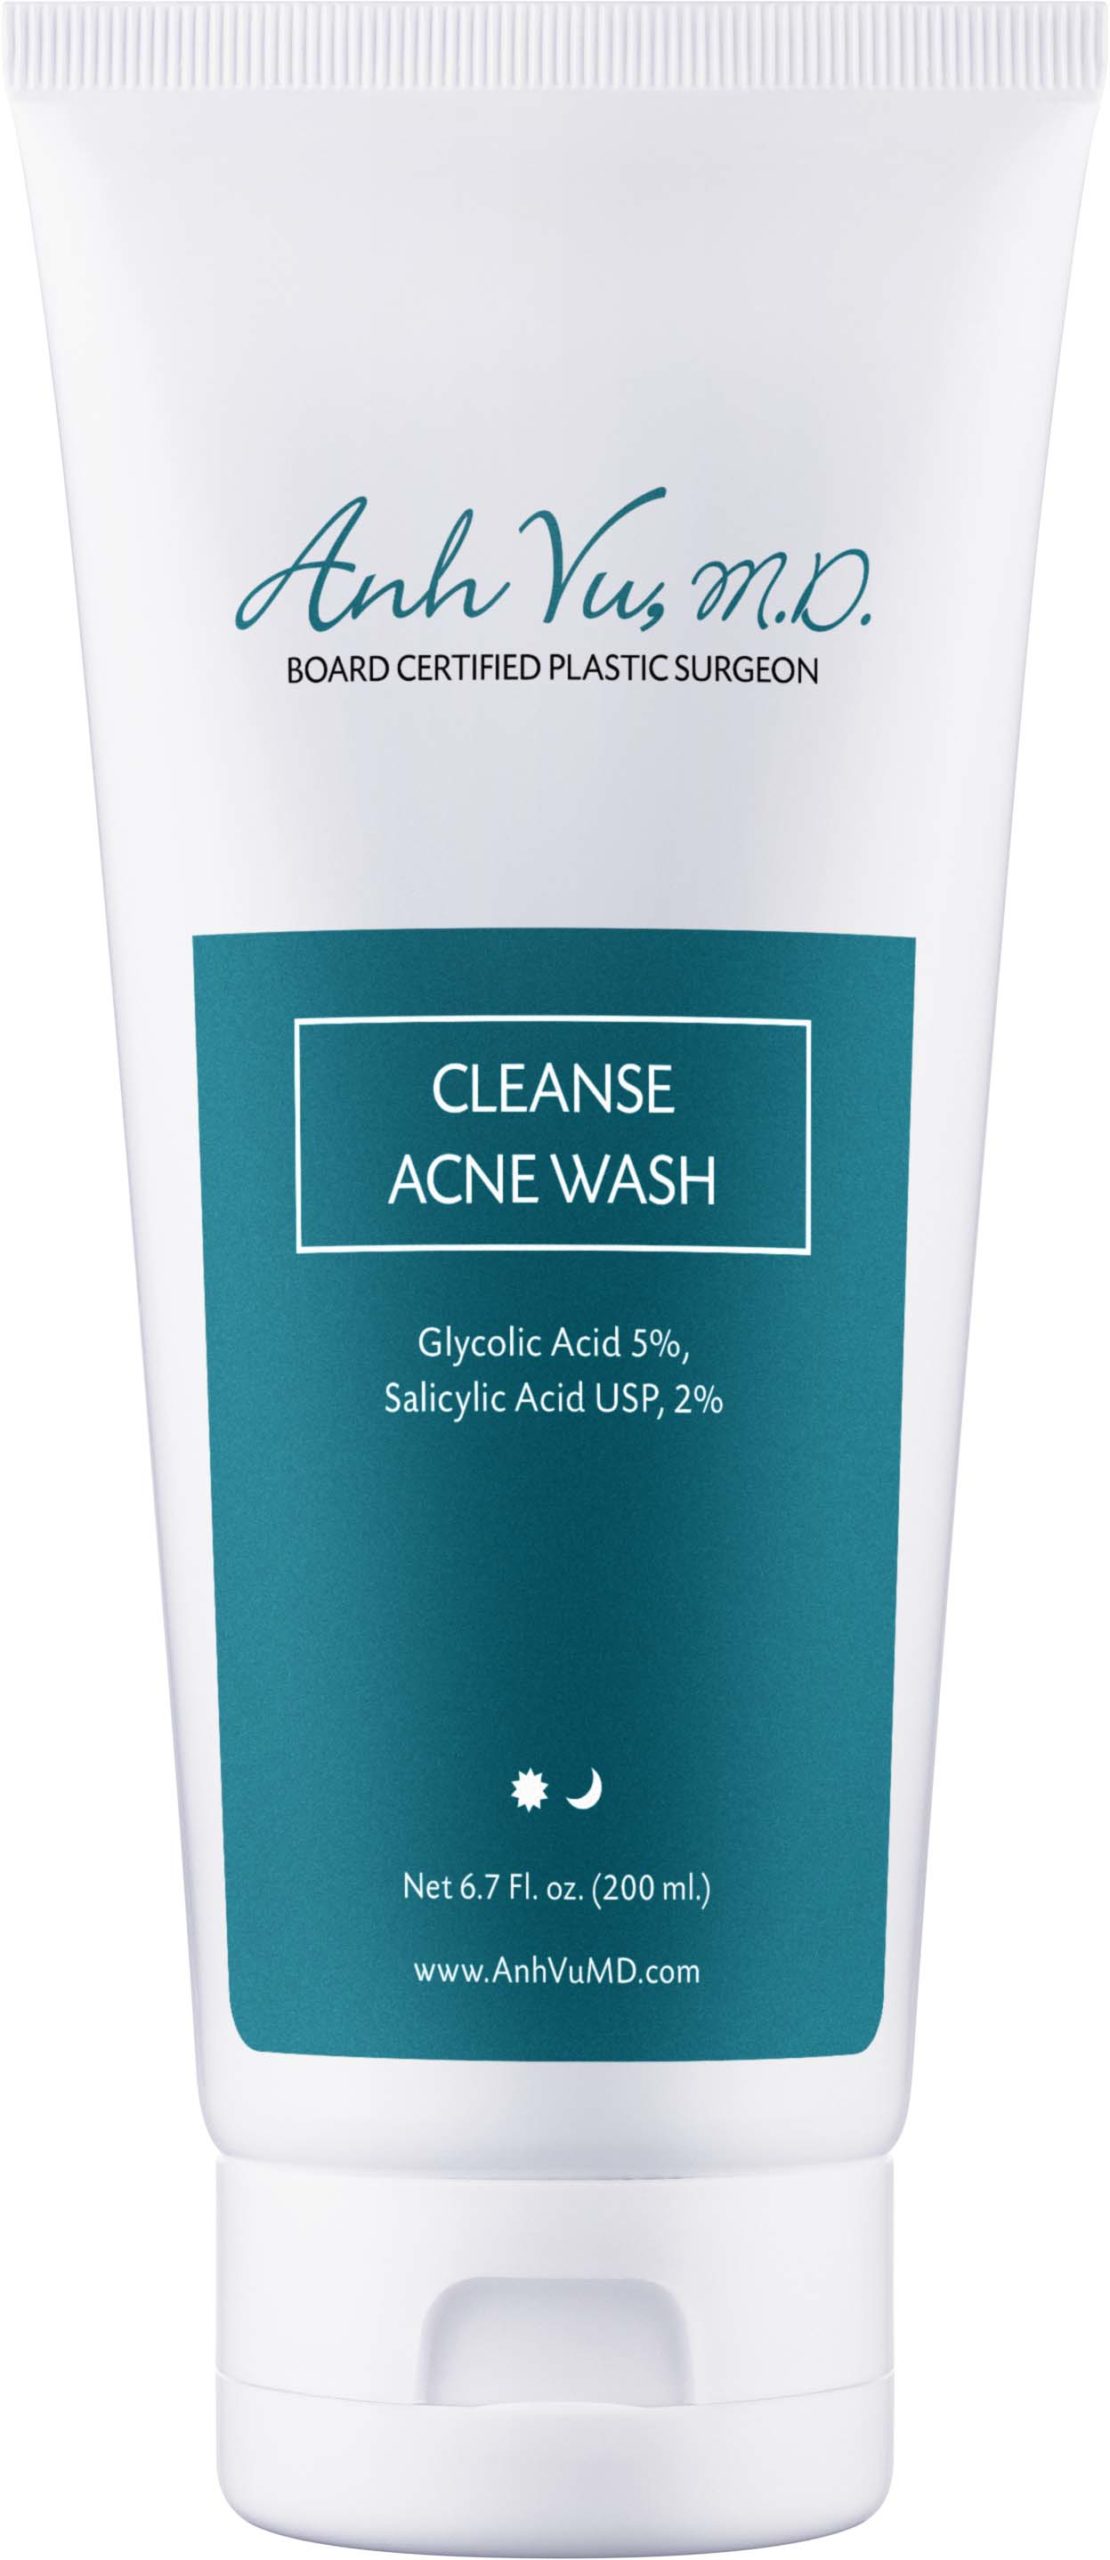 CLEANSE ACNE WASH